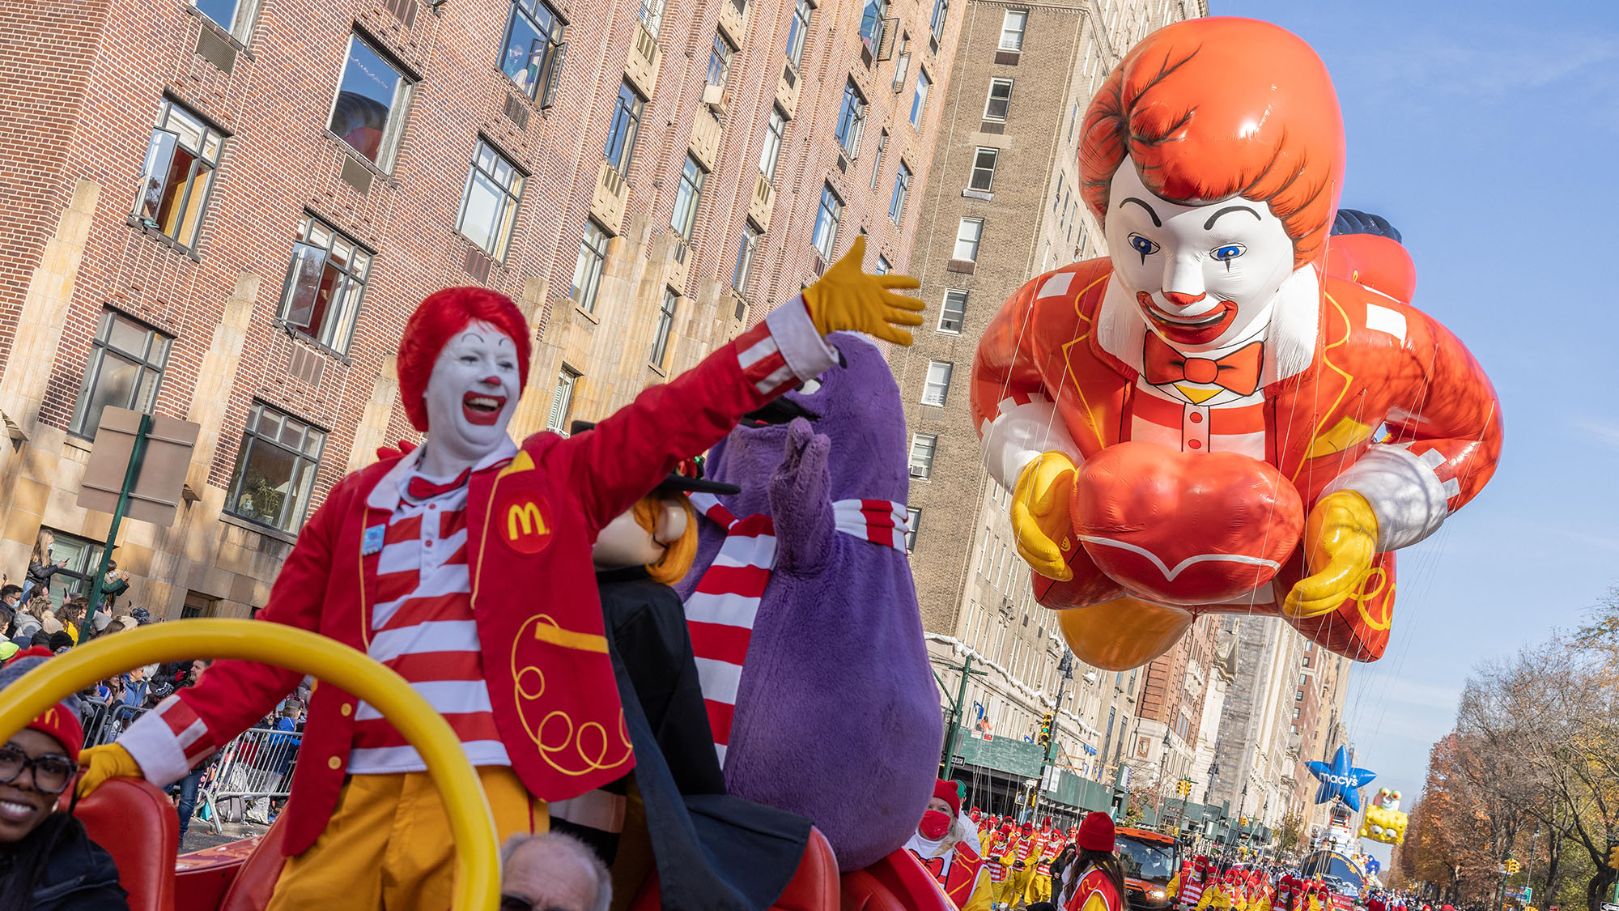 The Ronald McDonald balloon is seen during the Macy's Thanksgiving Day Parade in New York City, New York on November 25, 2021. This year marks the 95th annual parade.
Yuki IWAMURA / AFP